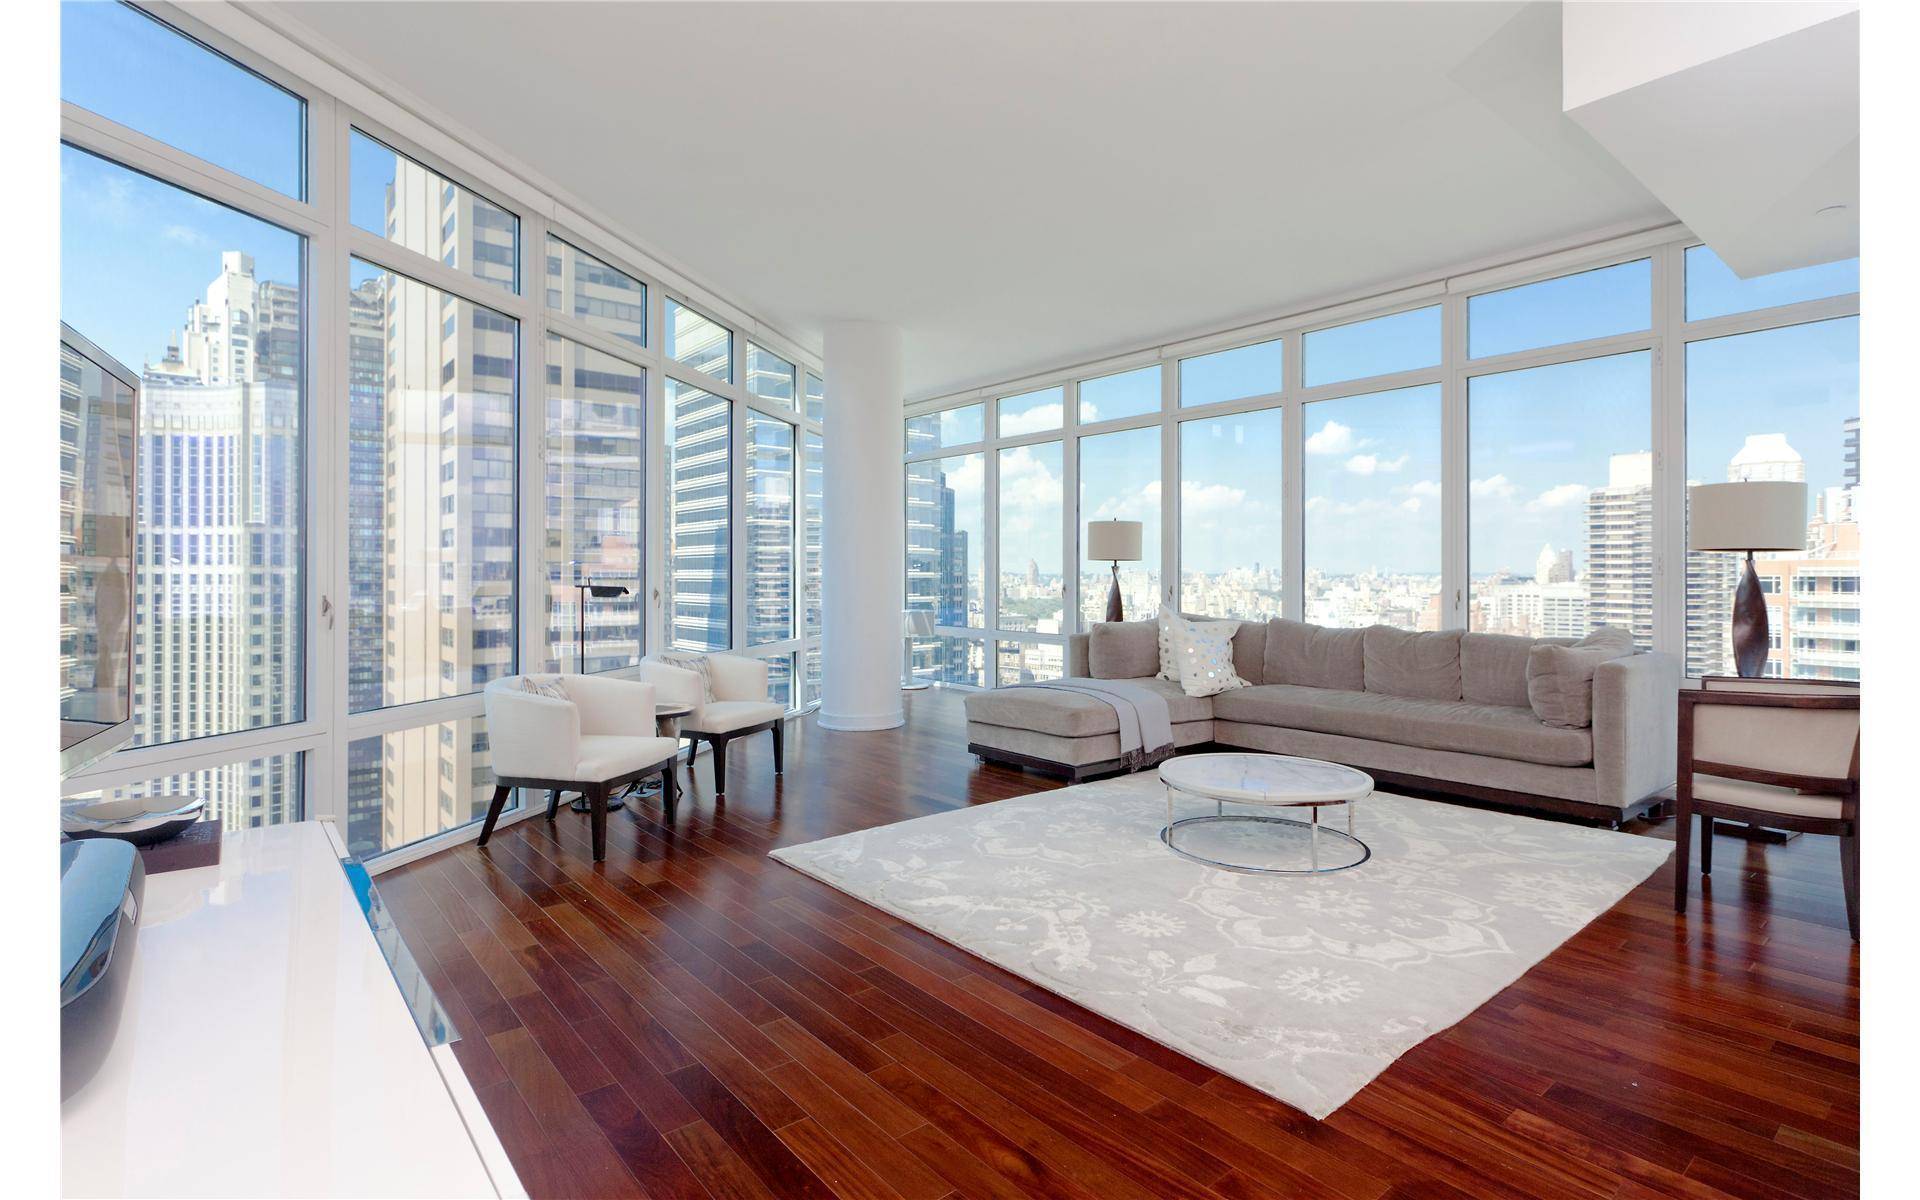 Sweeping views of Manhattan and tips of Central Park, 10' high ceilings in one of Midtown's luxurious Boutique Condo bldgs.